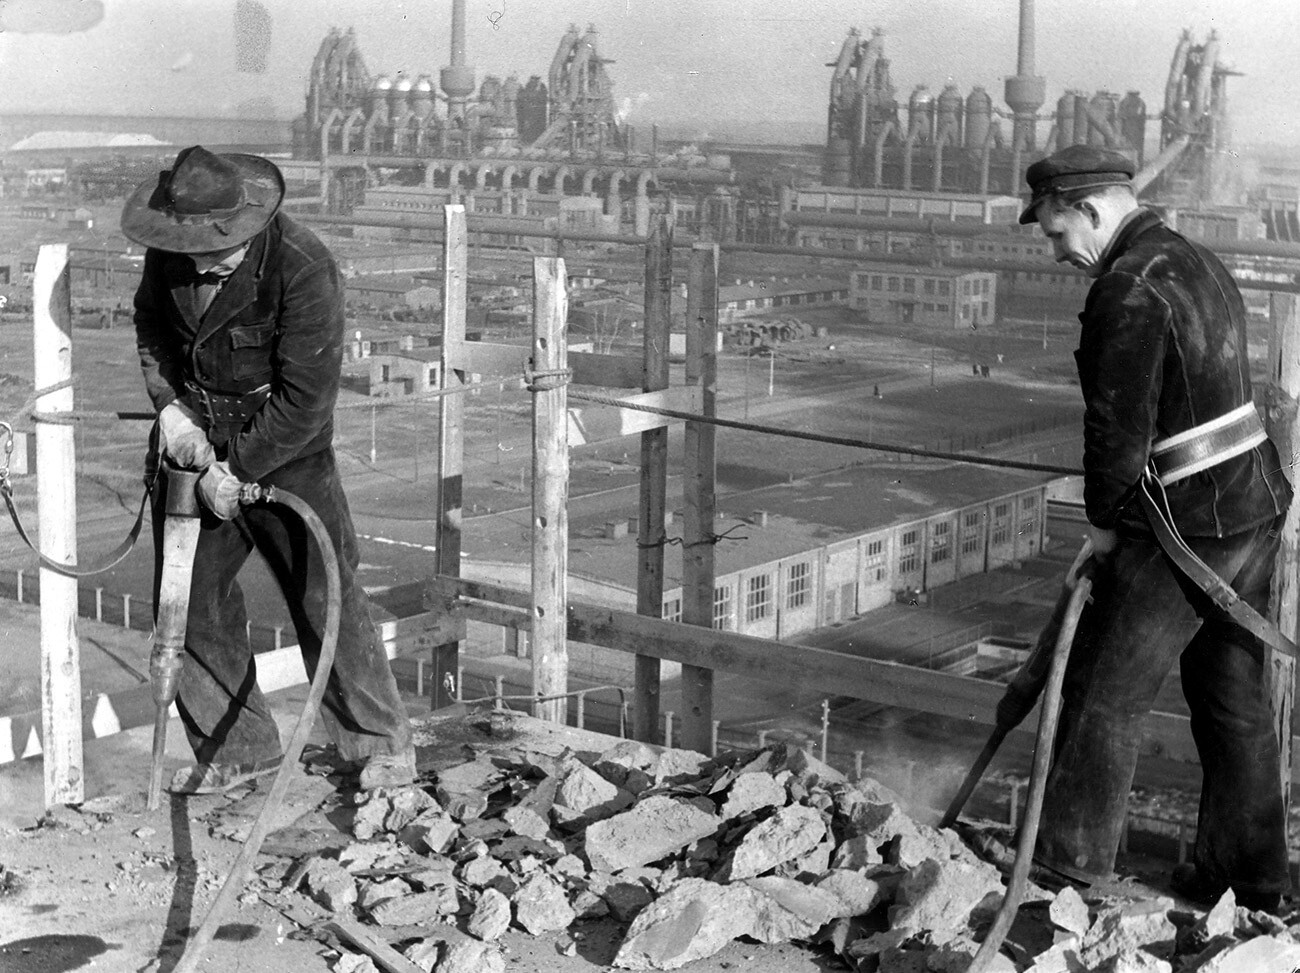 Construction works, 1958.